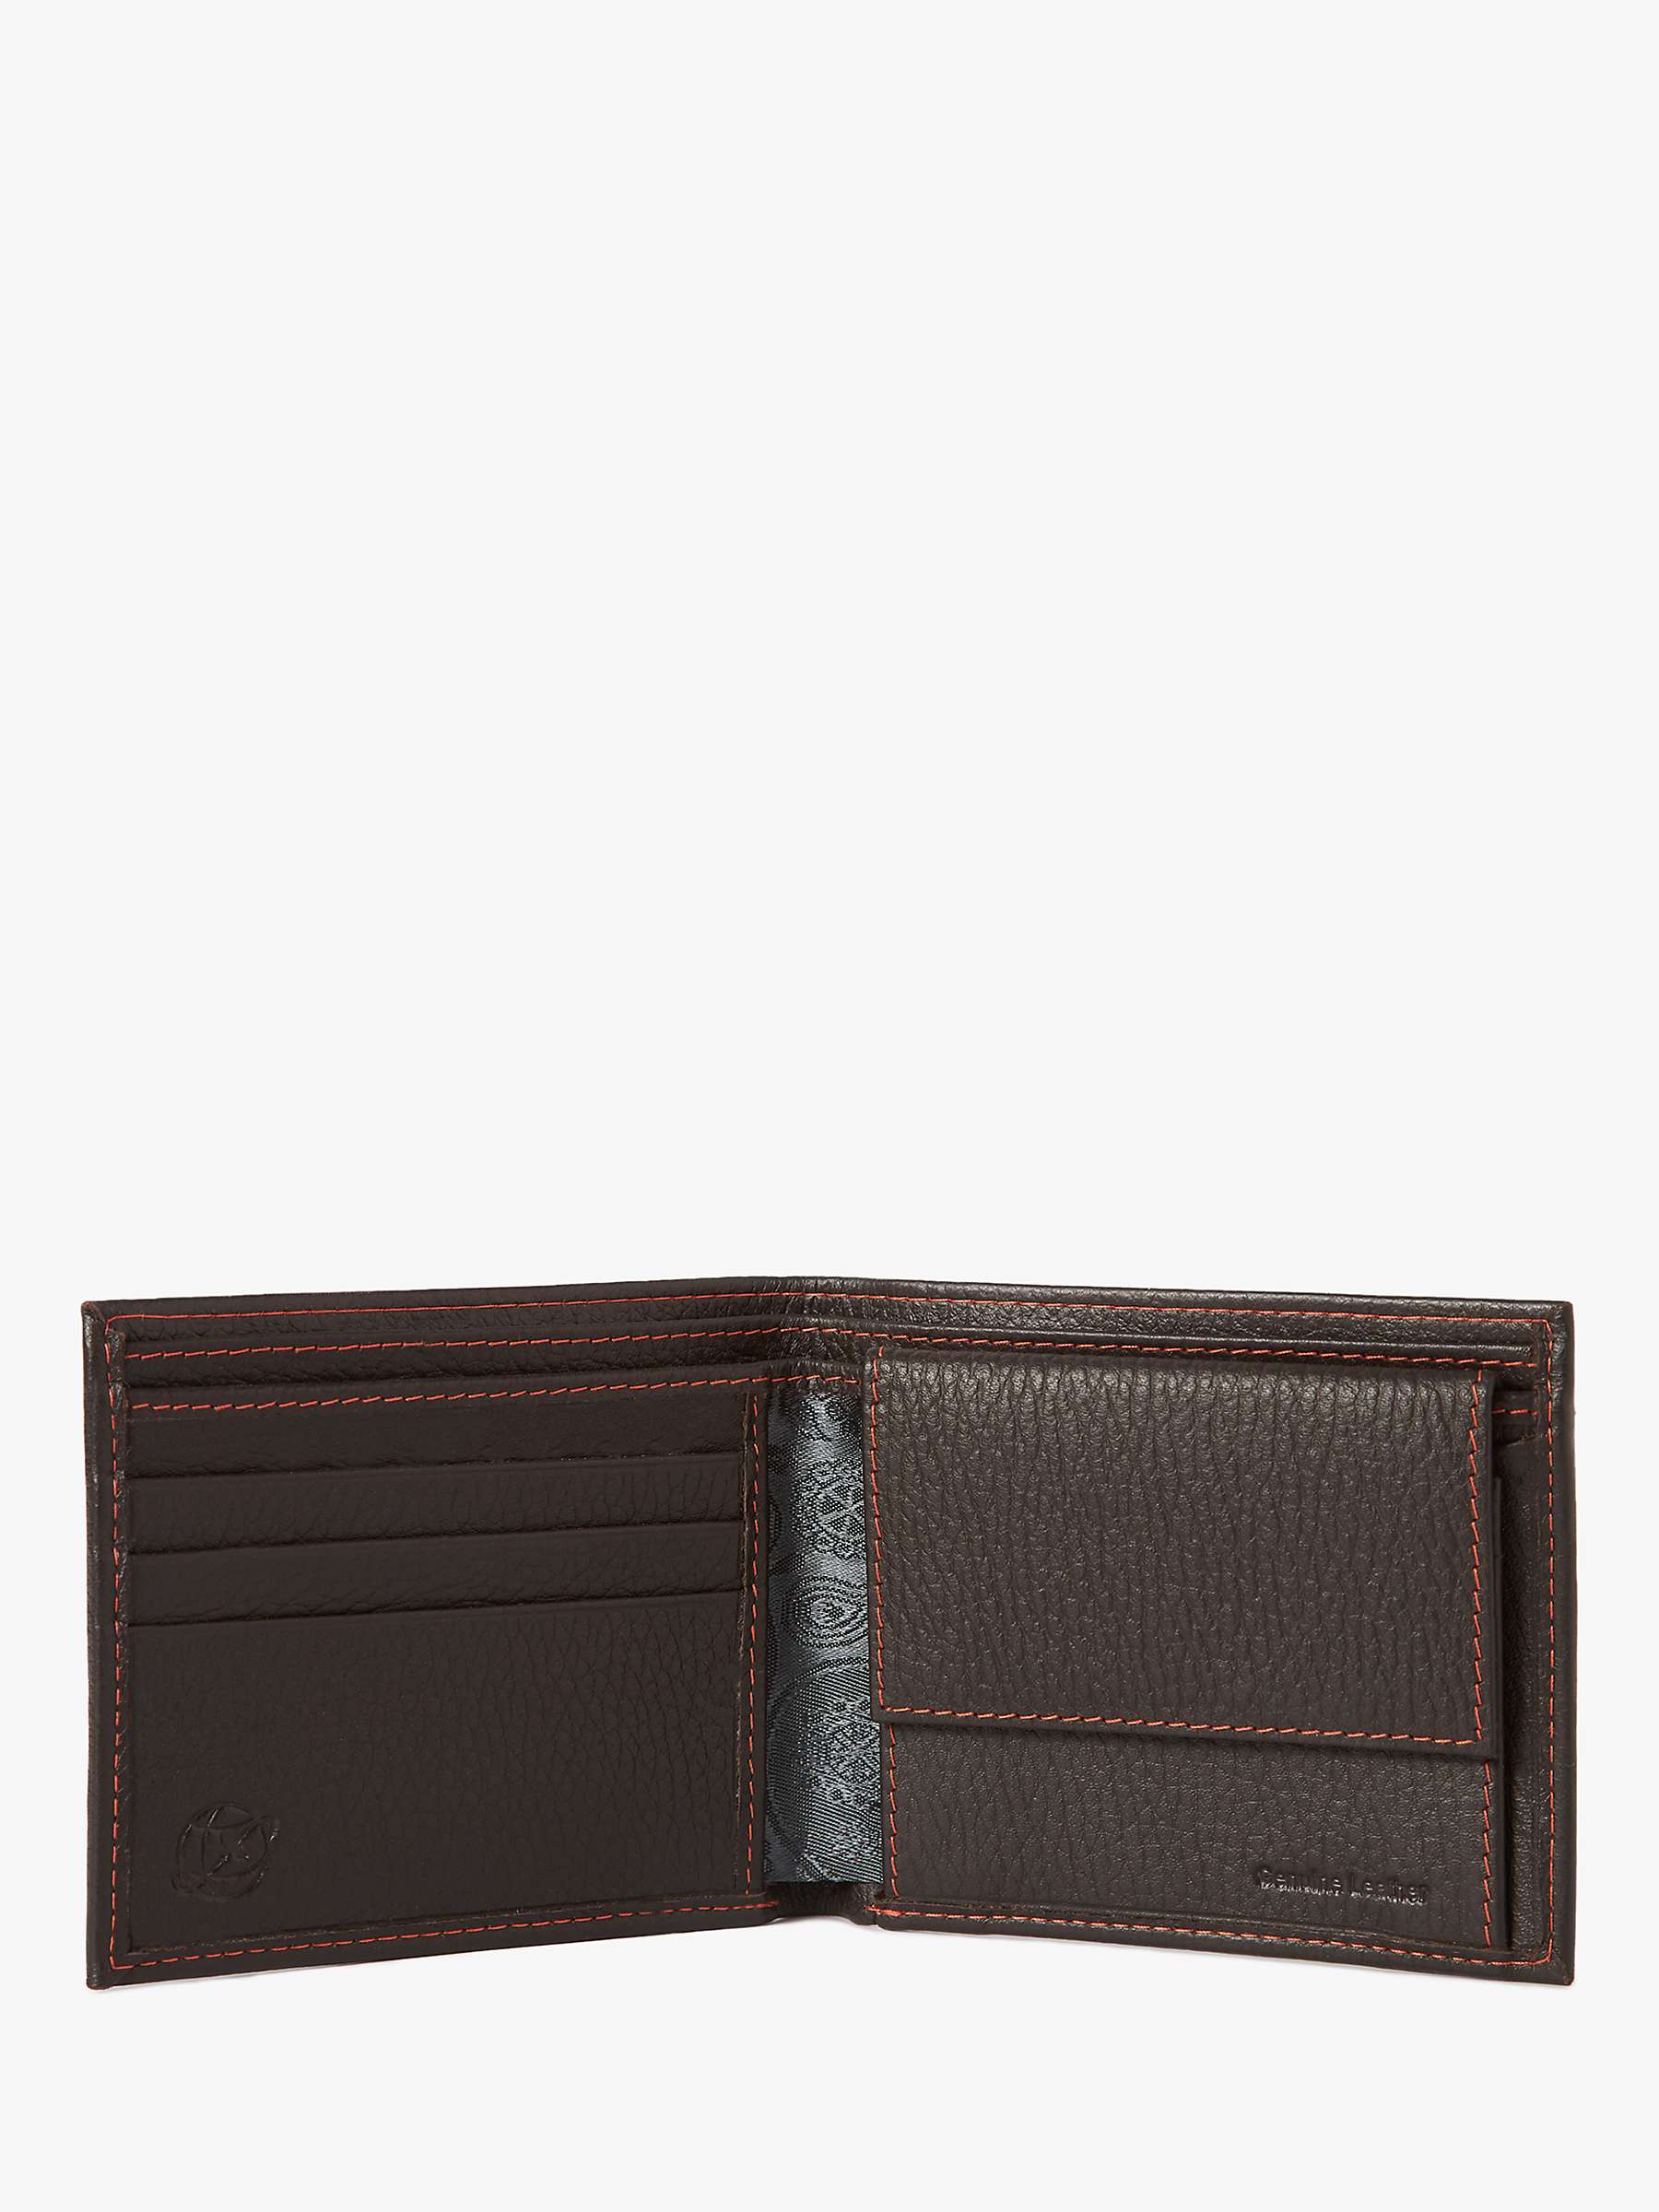 Buy Simon Carter Soft Leather Coin Wallet, Brown Online at johnlewis.com